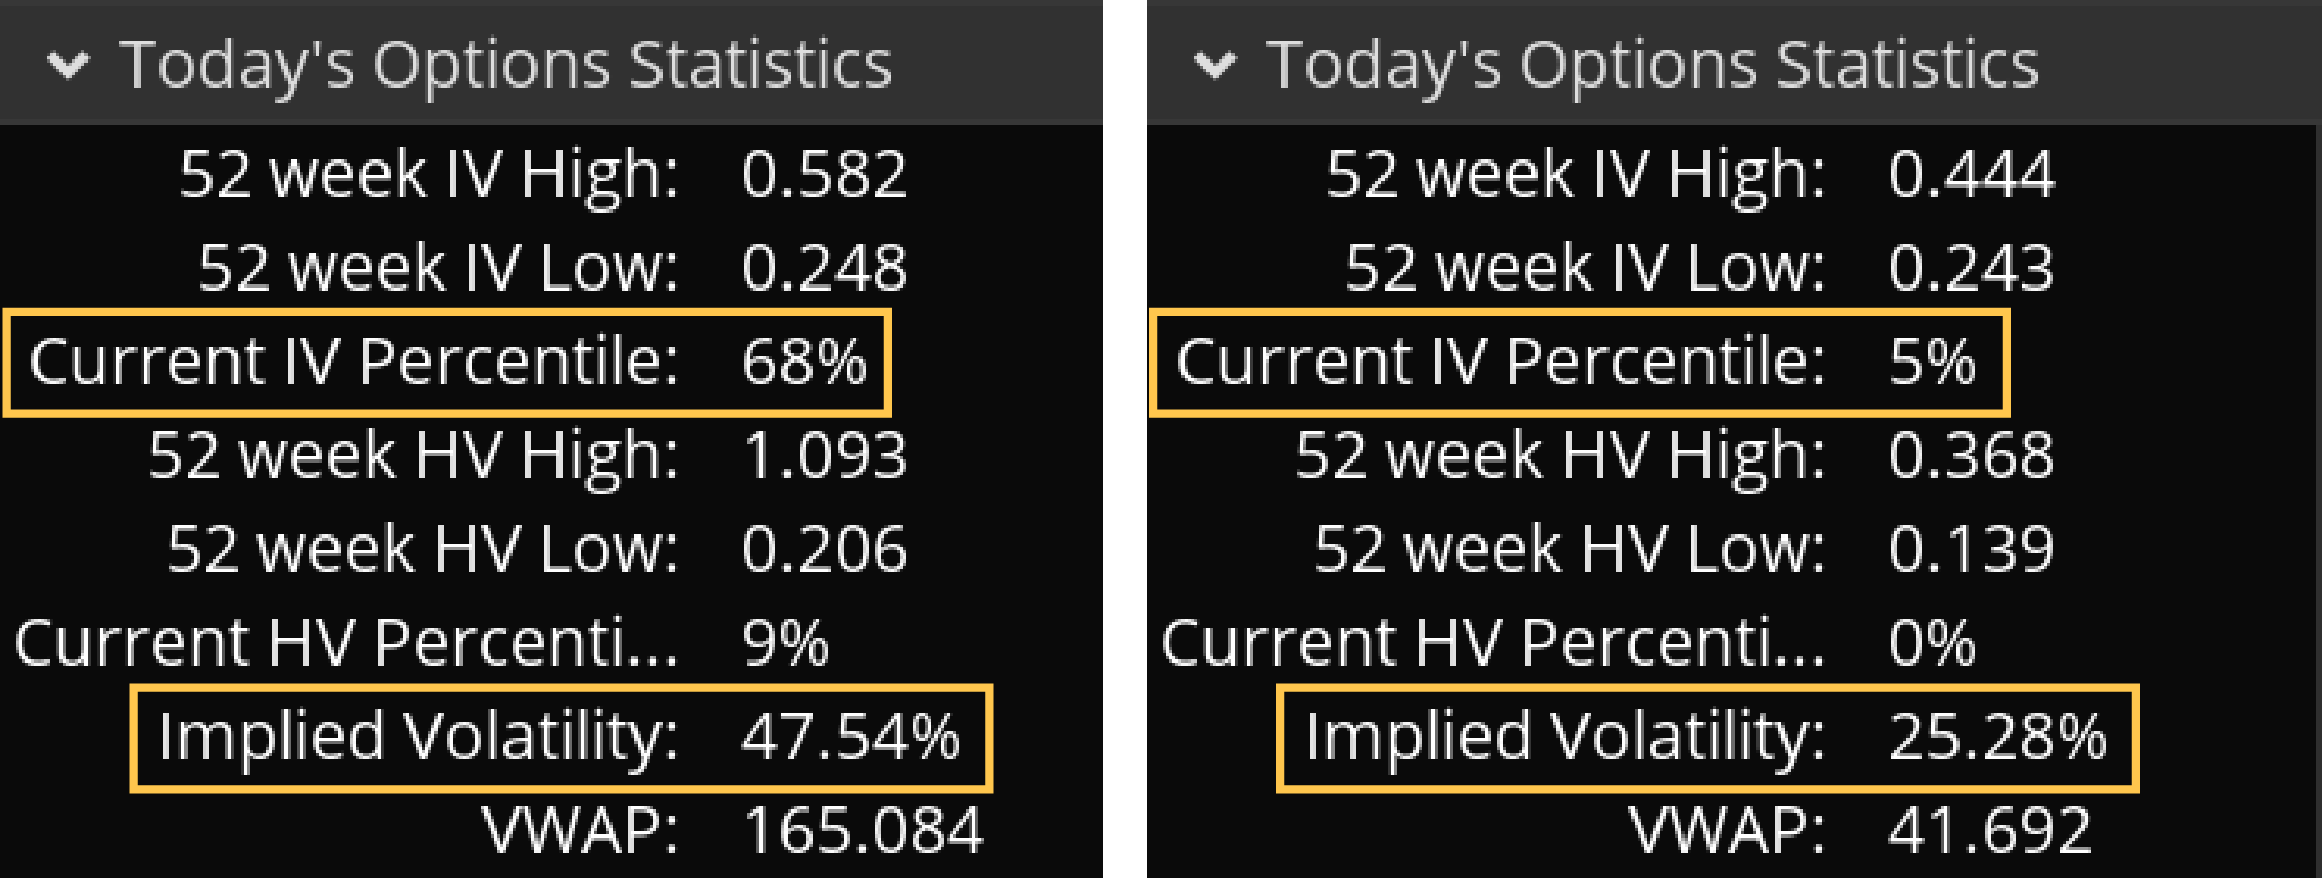 The tables show examples of daily options statistics from the thinkorswim platform, including a stock with current implied volatility of 48%, which is in the 68th percentile, and one with implied volatility of 25%, which is in the 5th percentile.